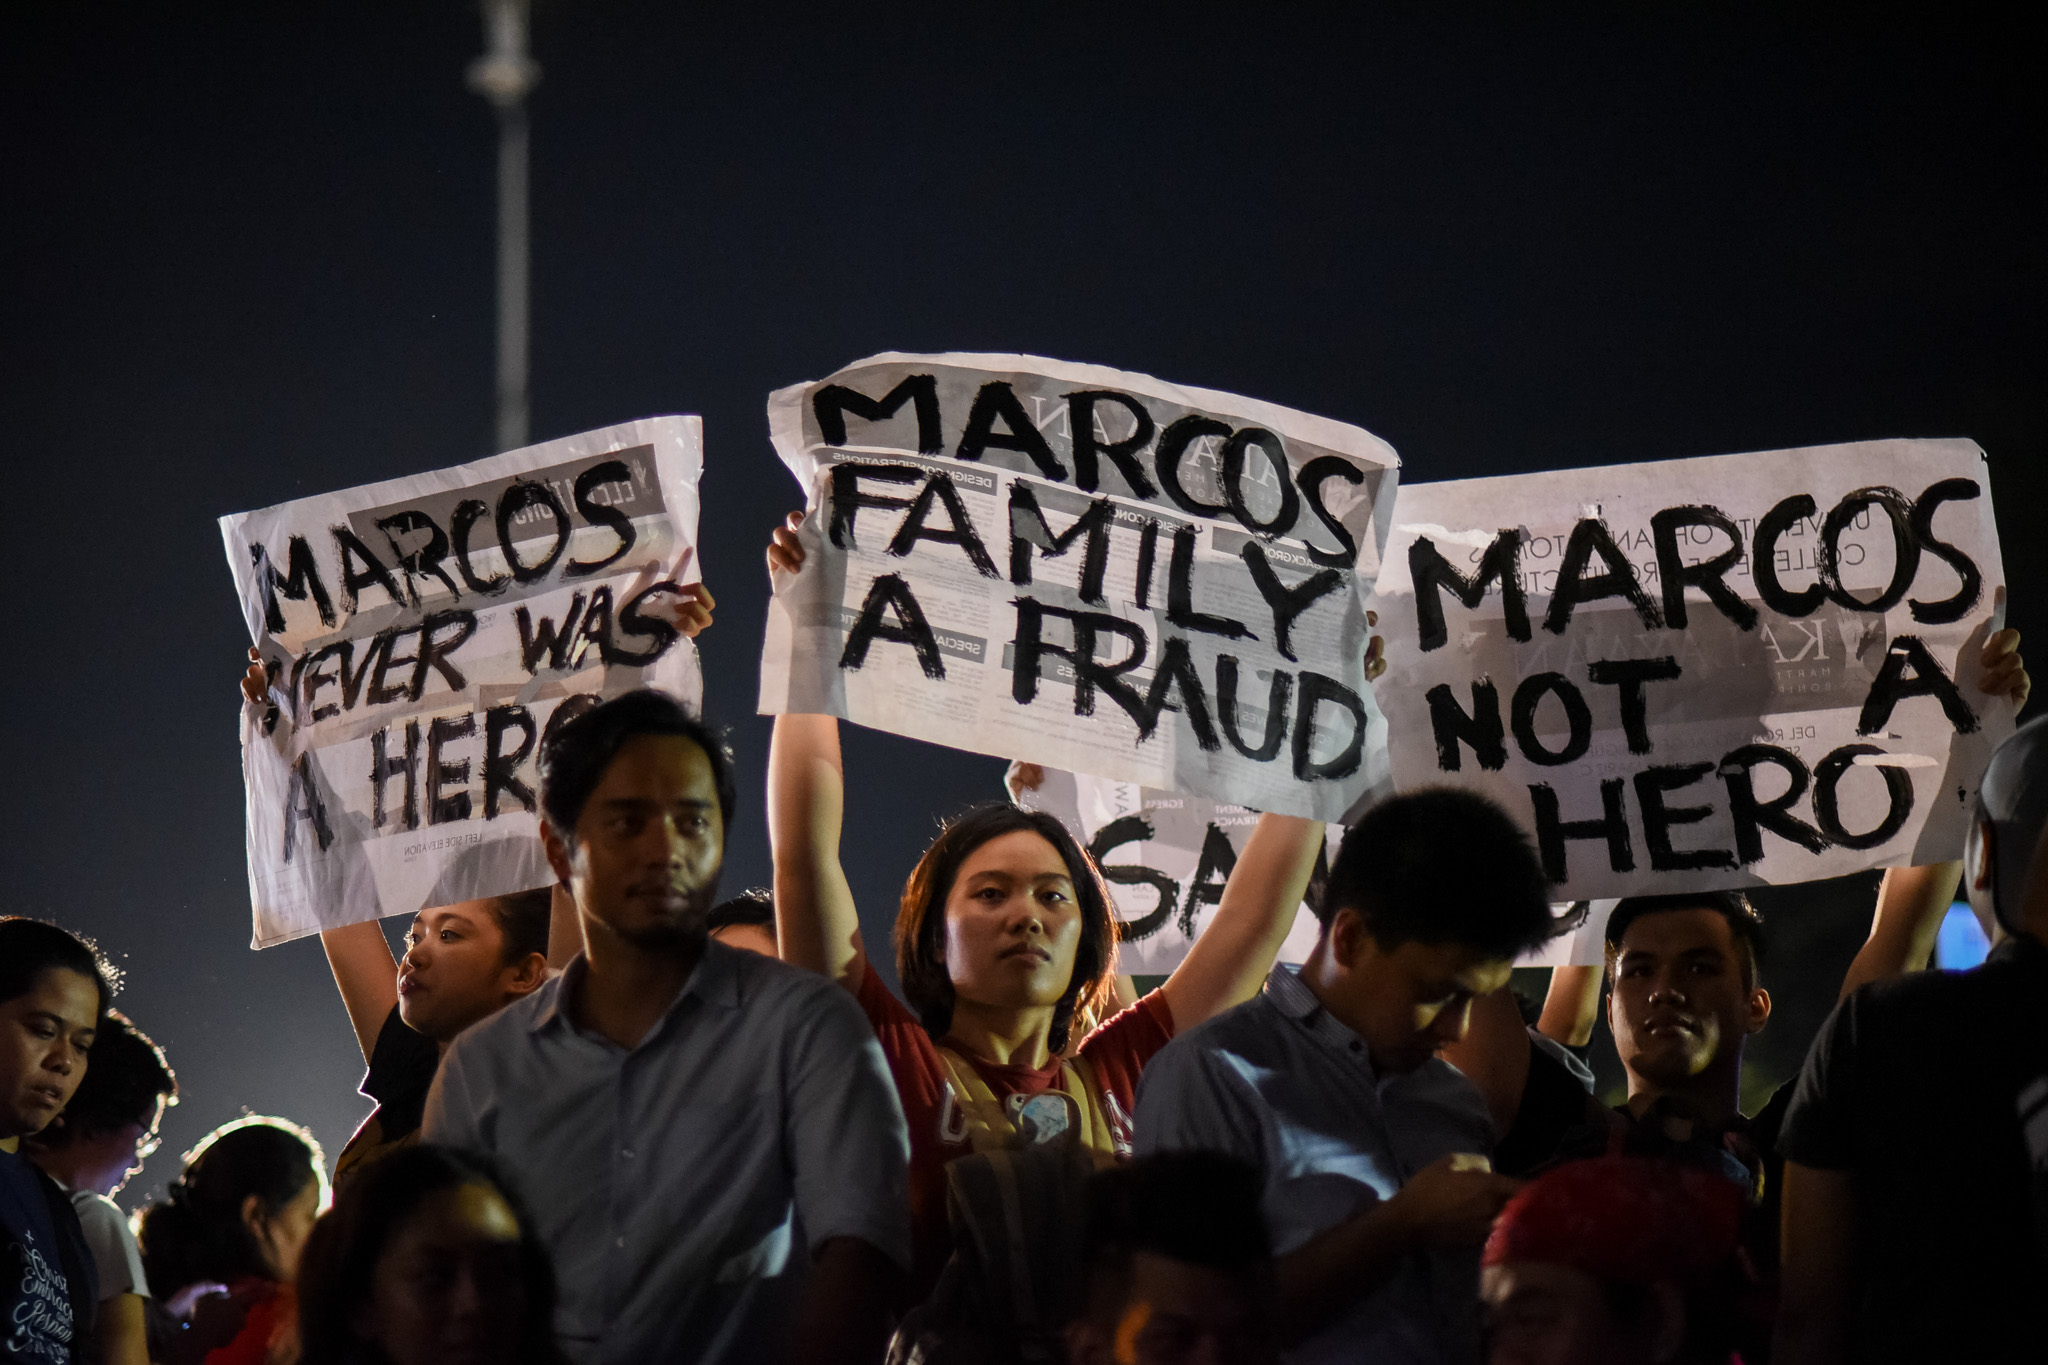 FREE TO PROTEST. President Rodrigo Duterte tells the Philippine National Police to let anti-Marcos protesters march and assemble freely on November 25, 2016. File photo by Martin San Diego/Rappler